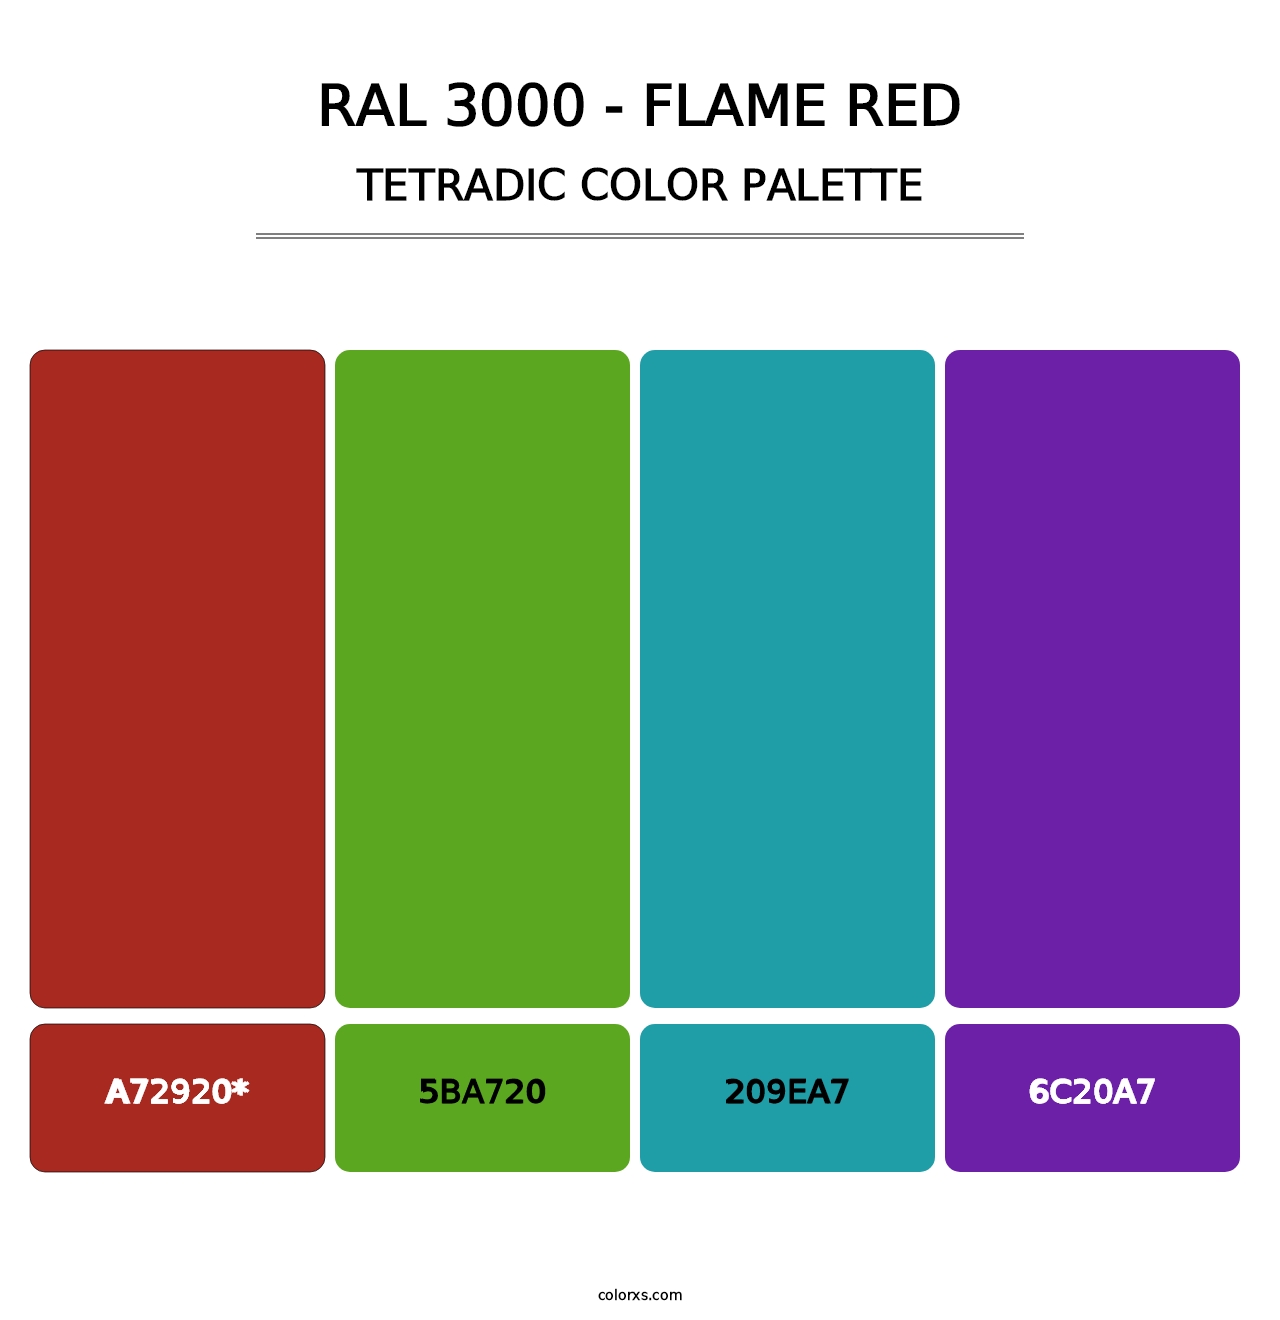 RAL 3000 - Flame Red - Tetradic Color Palette